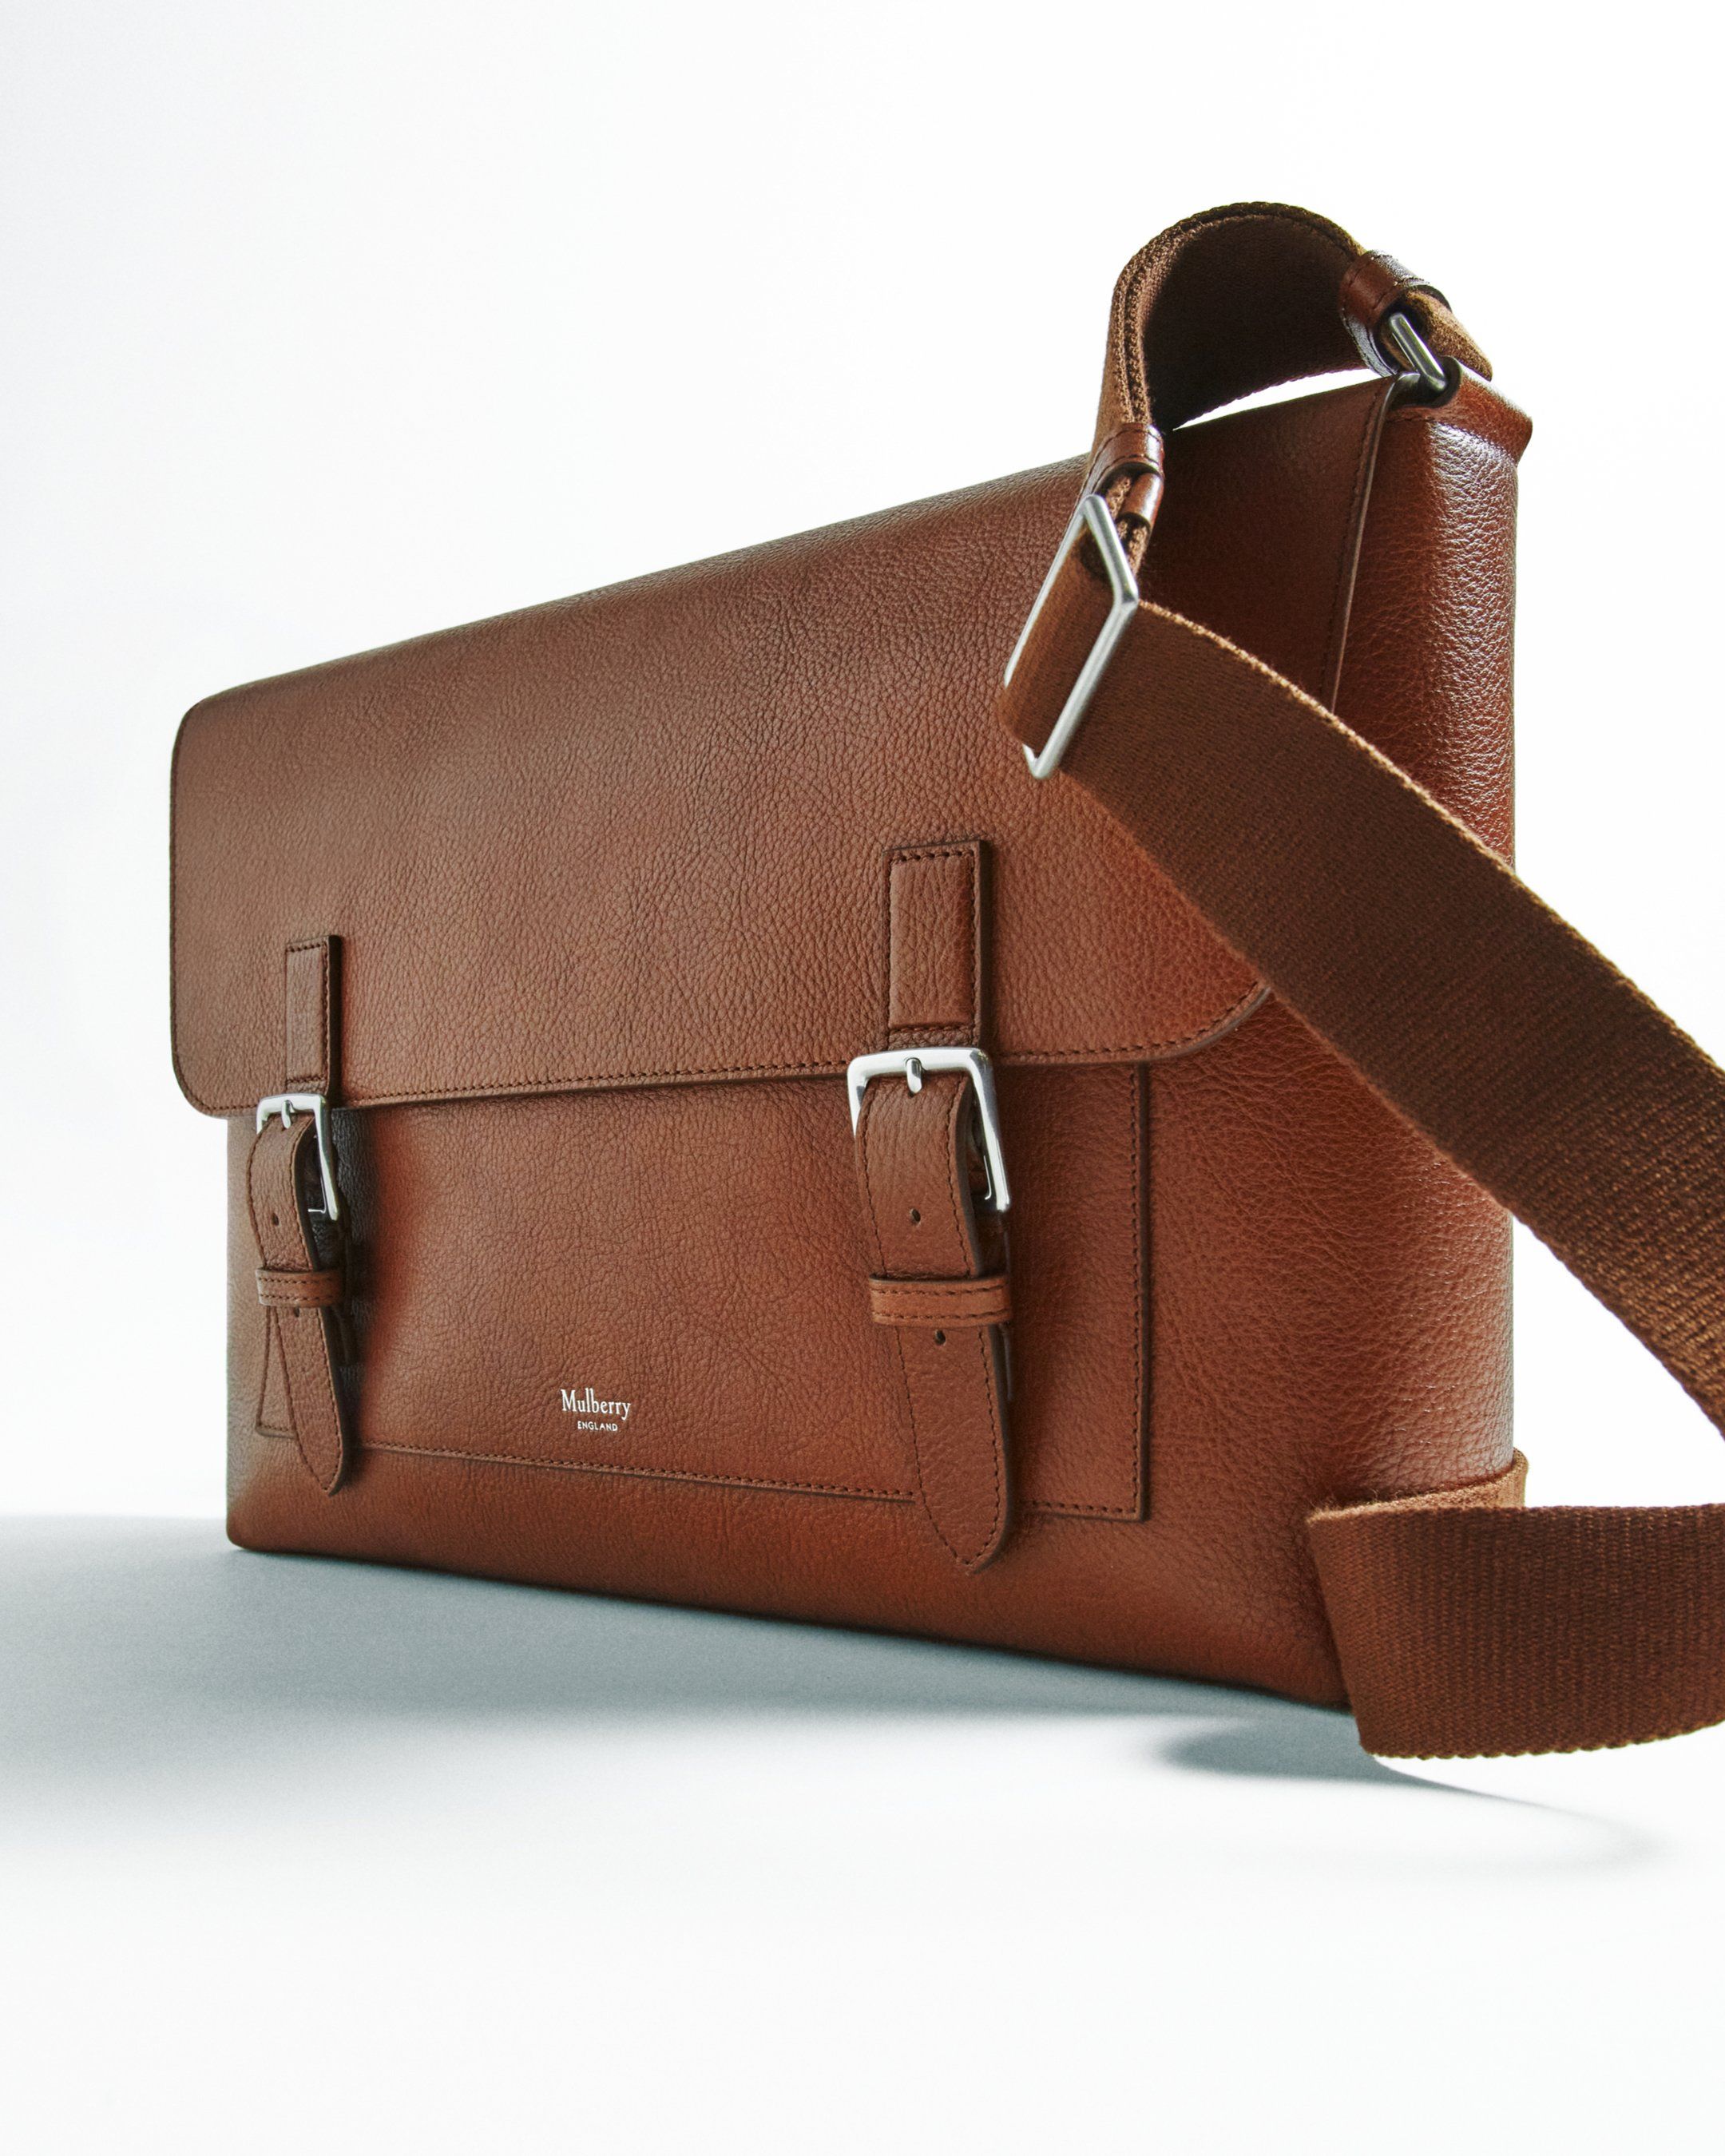 Mulberry Chiltern messenger bag in oak leather